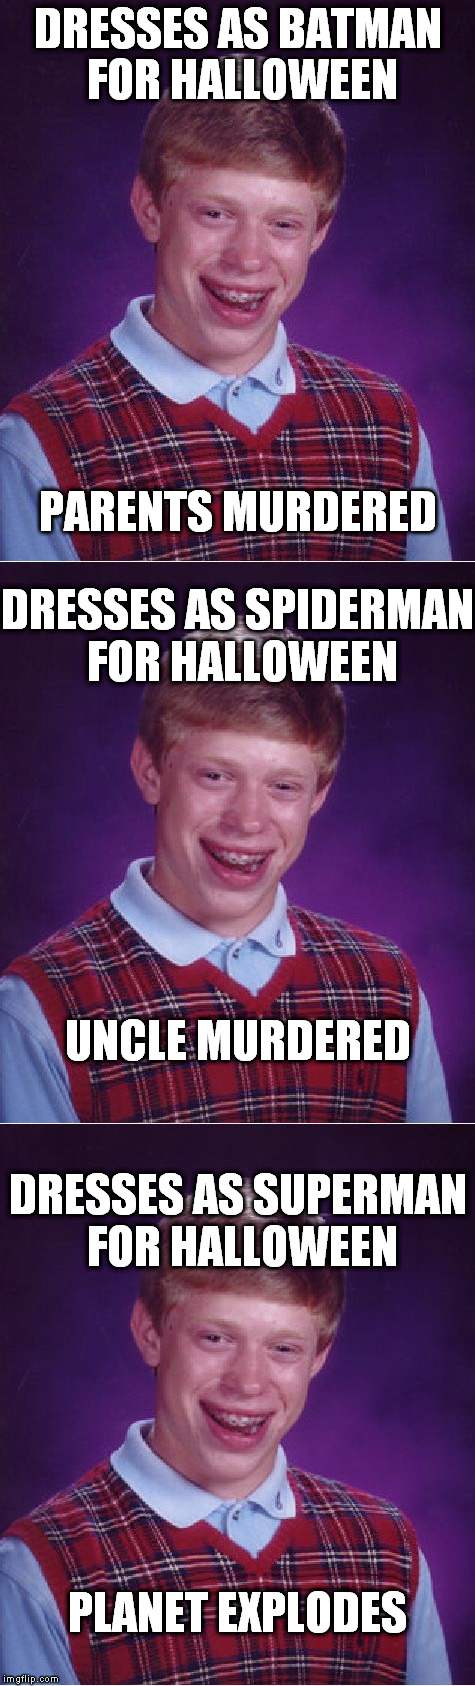 Bad Luck Brian goes Trick or Treating | DRESSES AS BATMAN FOR HALLOWEEN; PARENTS MURDERED; DRESSES AS SPIDERMAN FOR HALLOWEEN; UNCLE MURDERED; DRESSES AS SUPERMAN FOR HALLOWEEN; PLANET EXPLODES | image tagged in bad luck brian | made w/ Imgflip meme maker